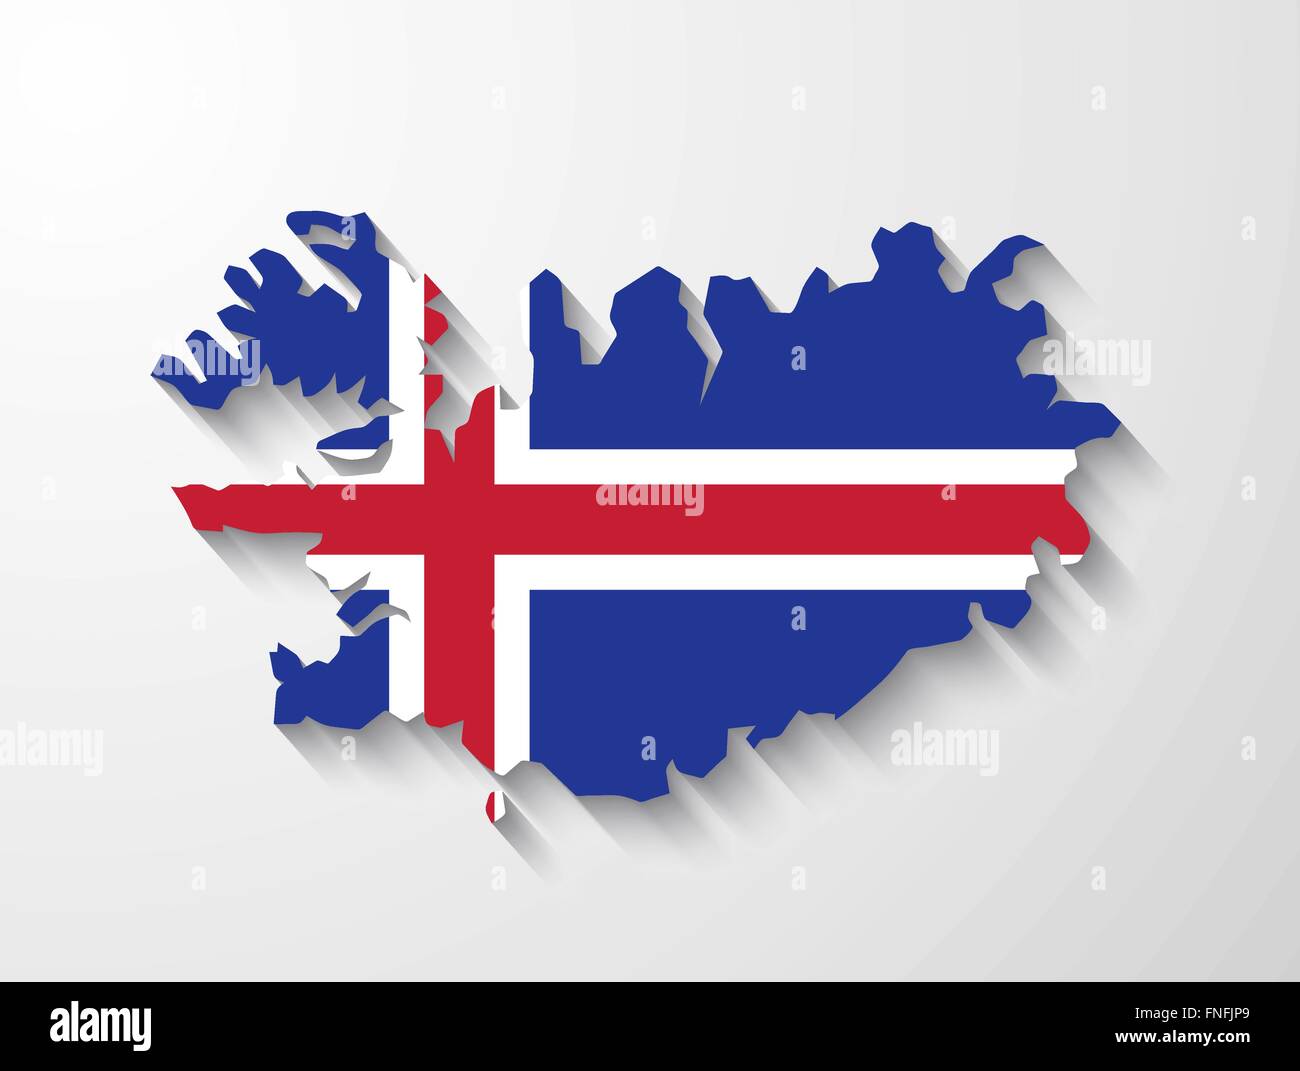 Iceland country map with flag and shadow effect presentation Stock Vector